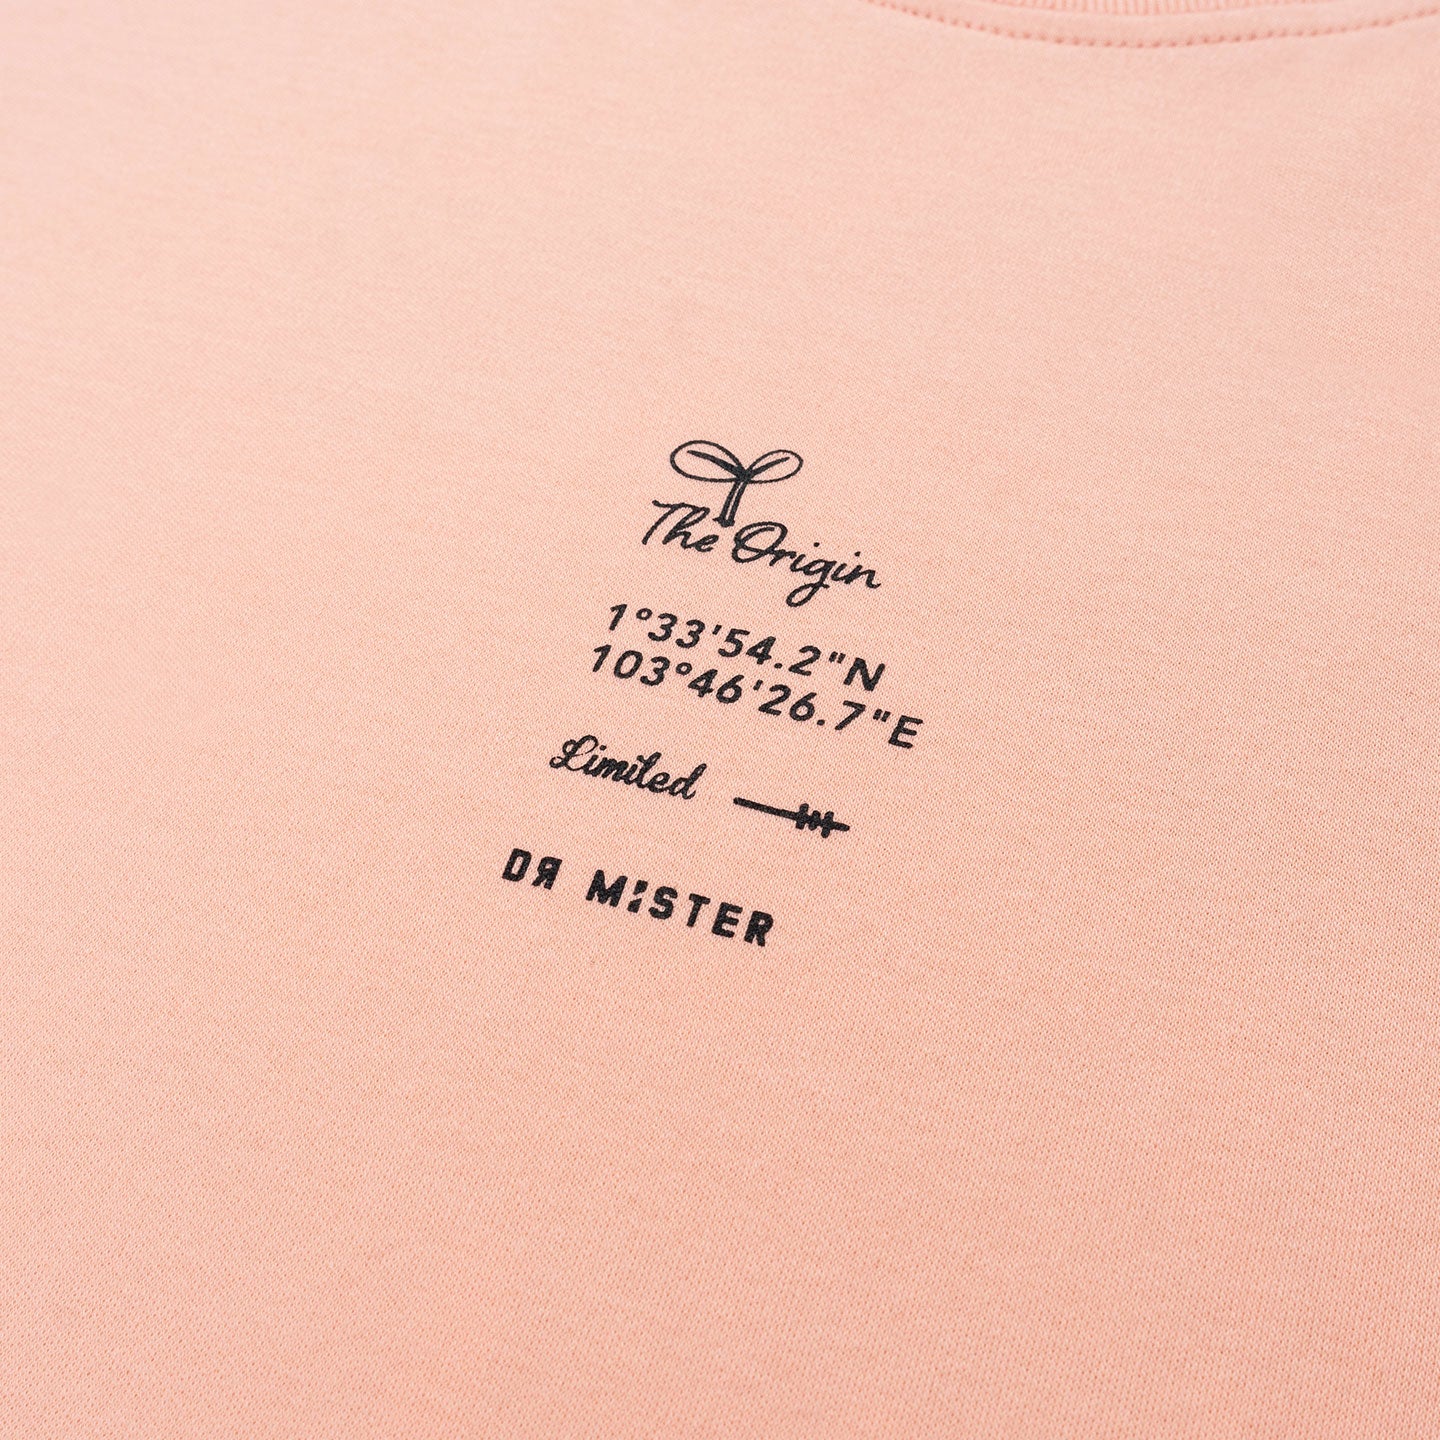 Sprout Oversized Tee - Salmon Pink (Limited)